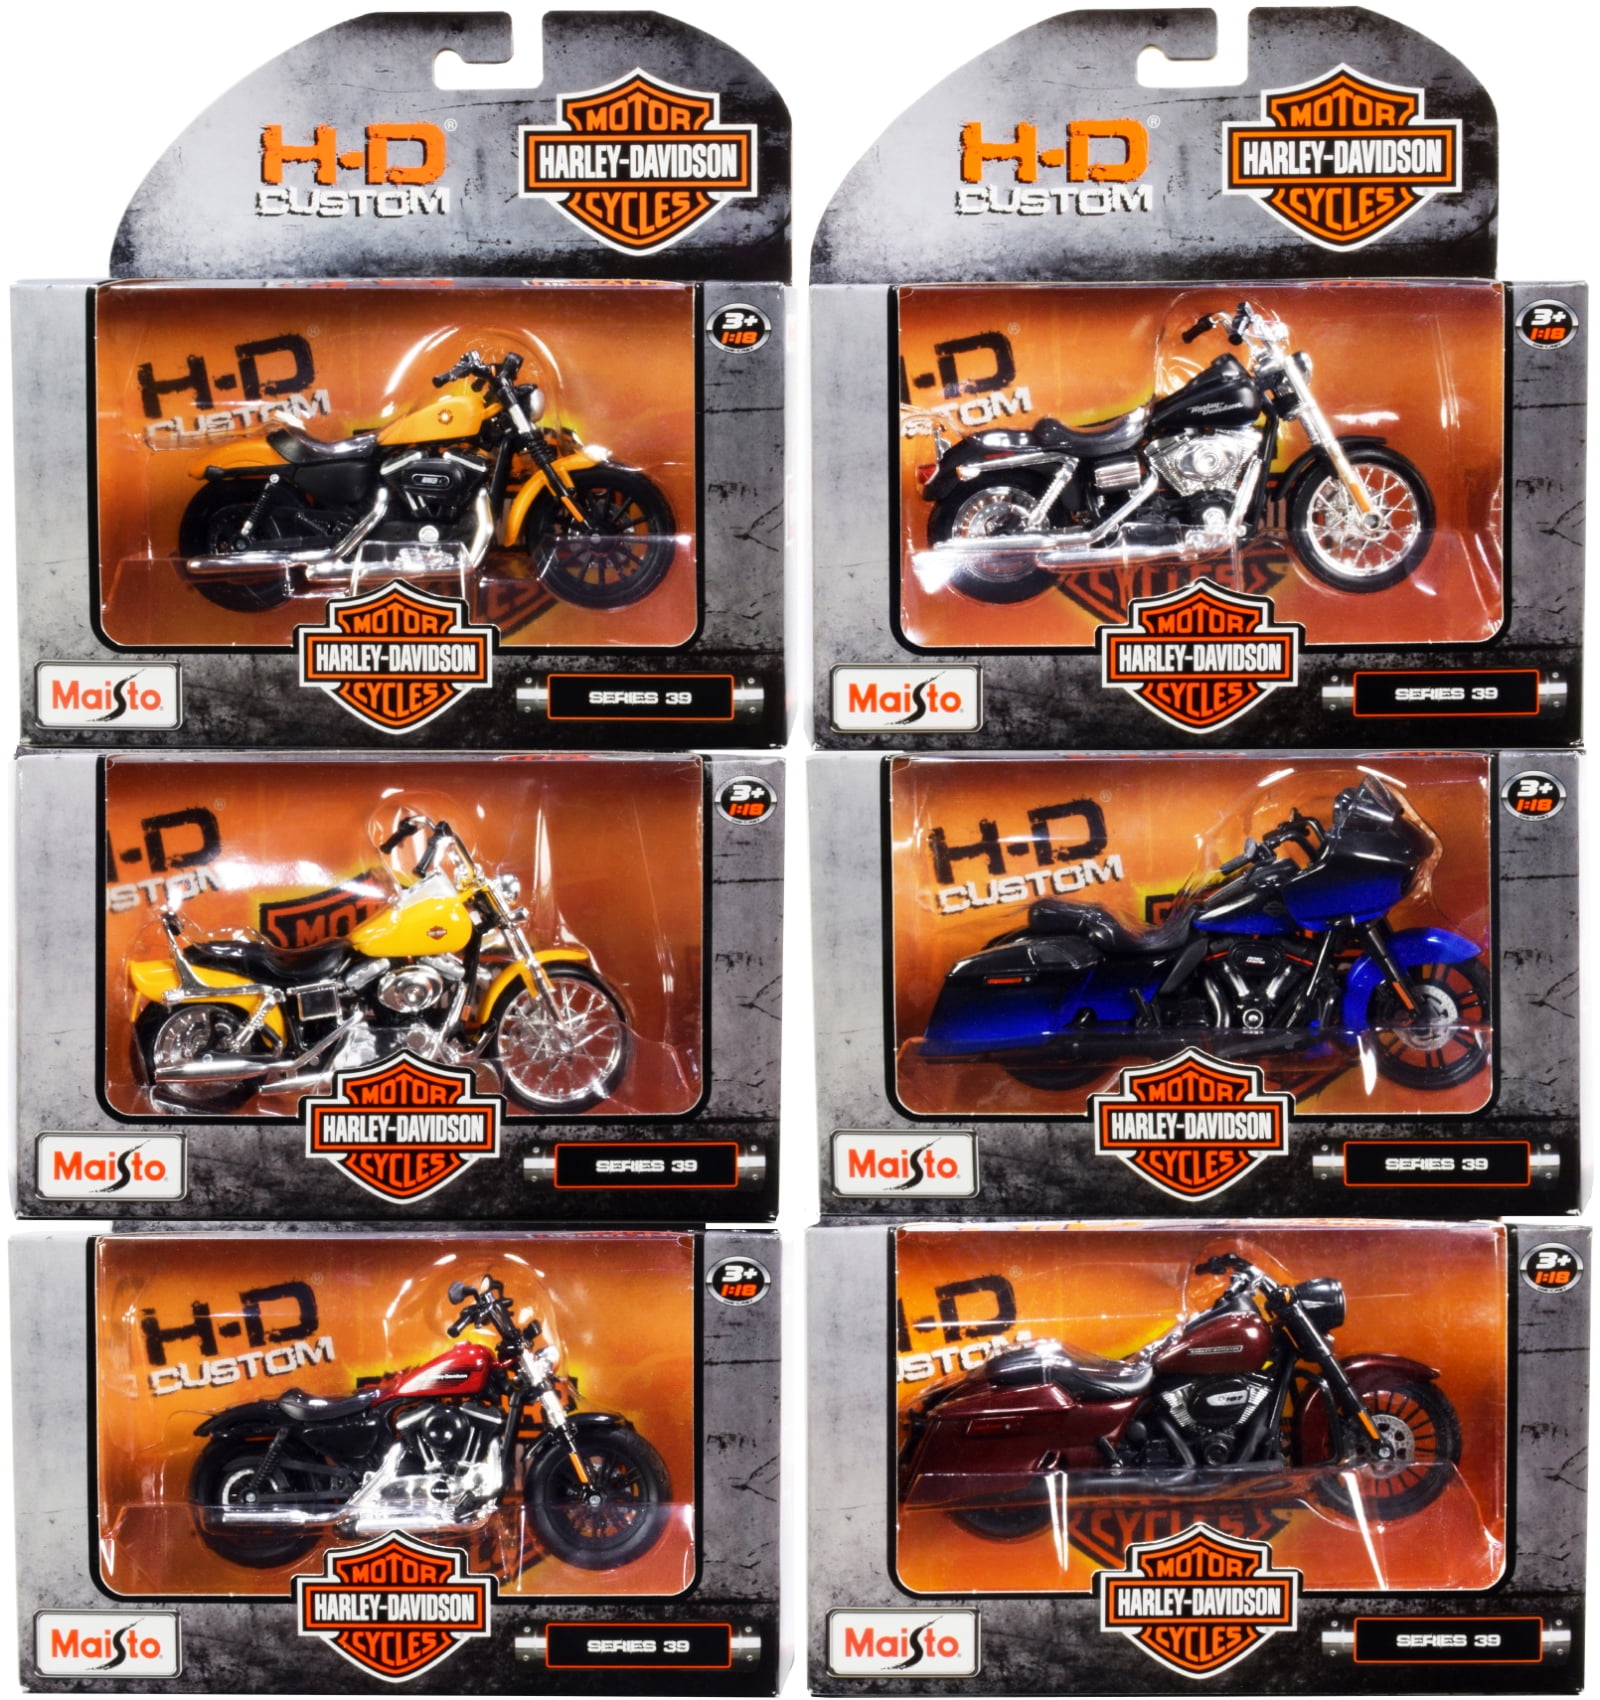 Harley Davidson Motorcycle 6pc Set Series 32 1/18 Diecast Models by Maisto 31360 for sale online 